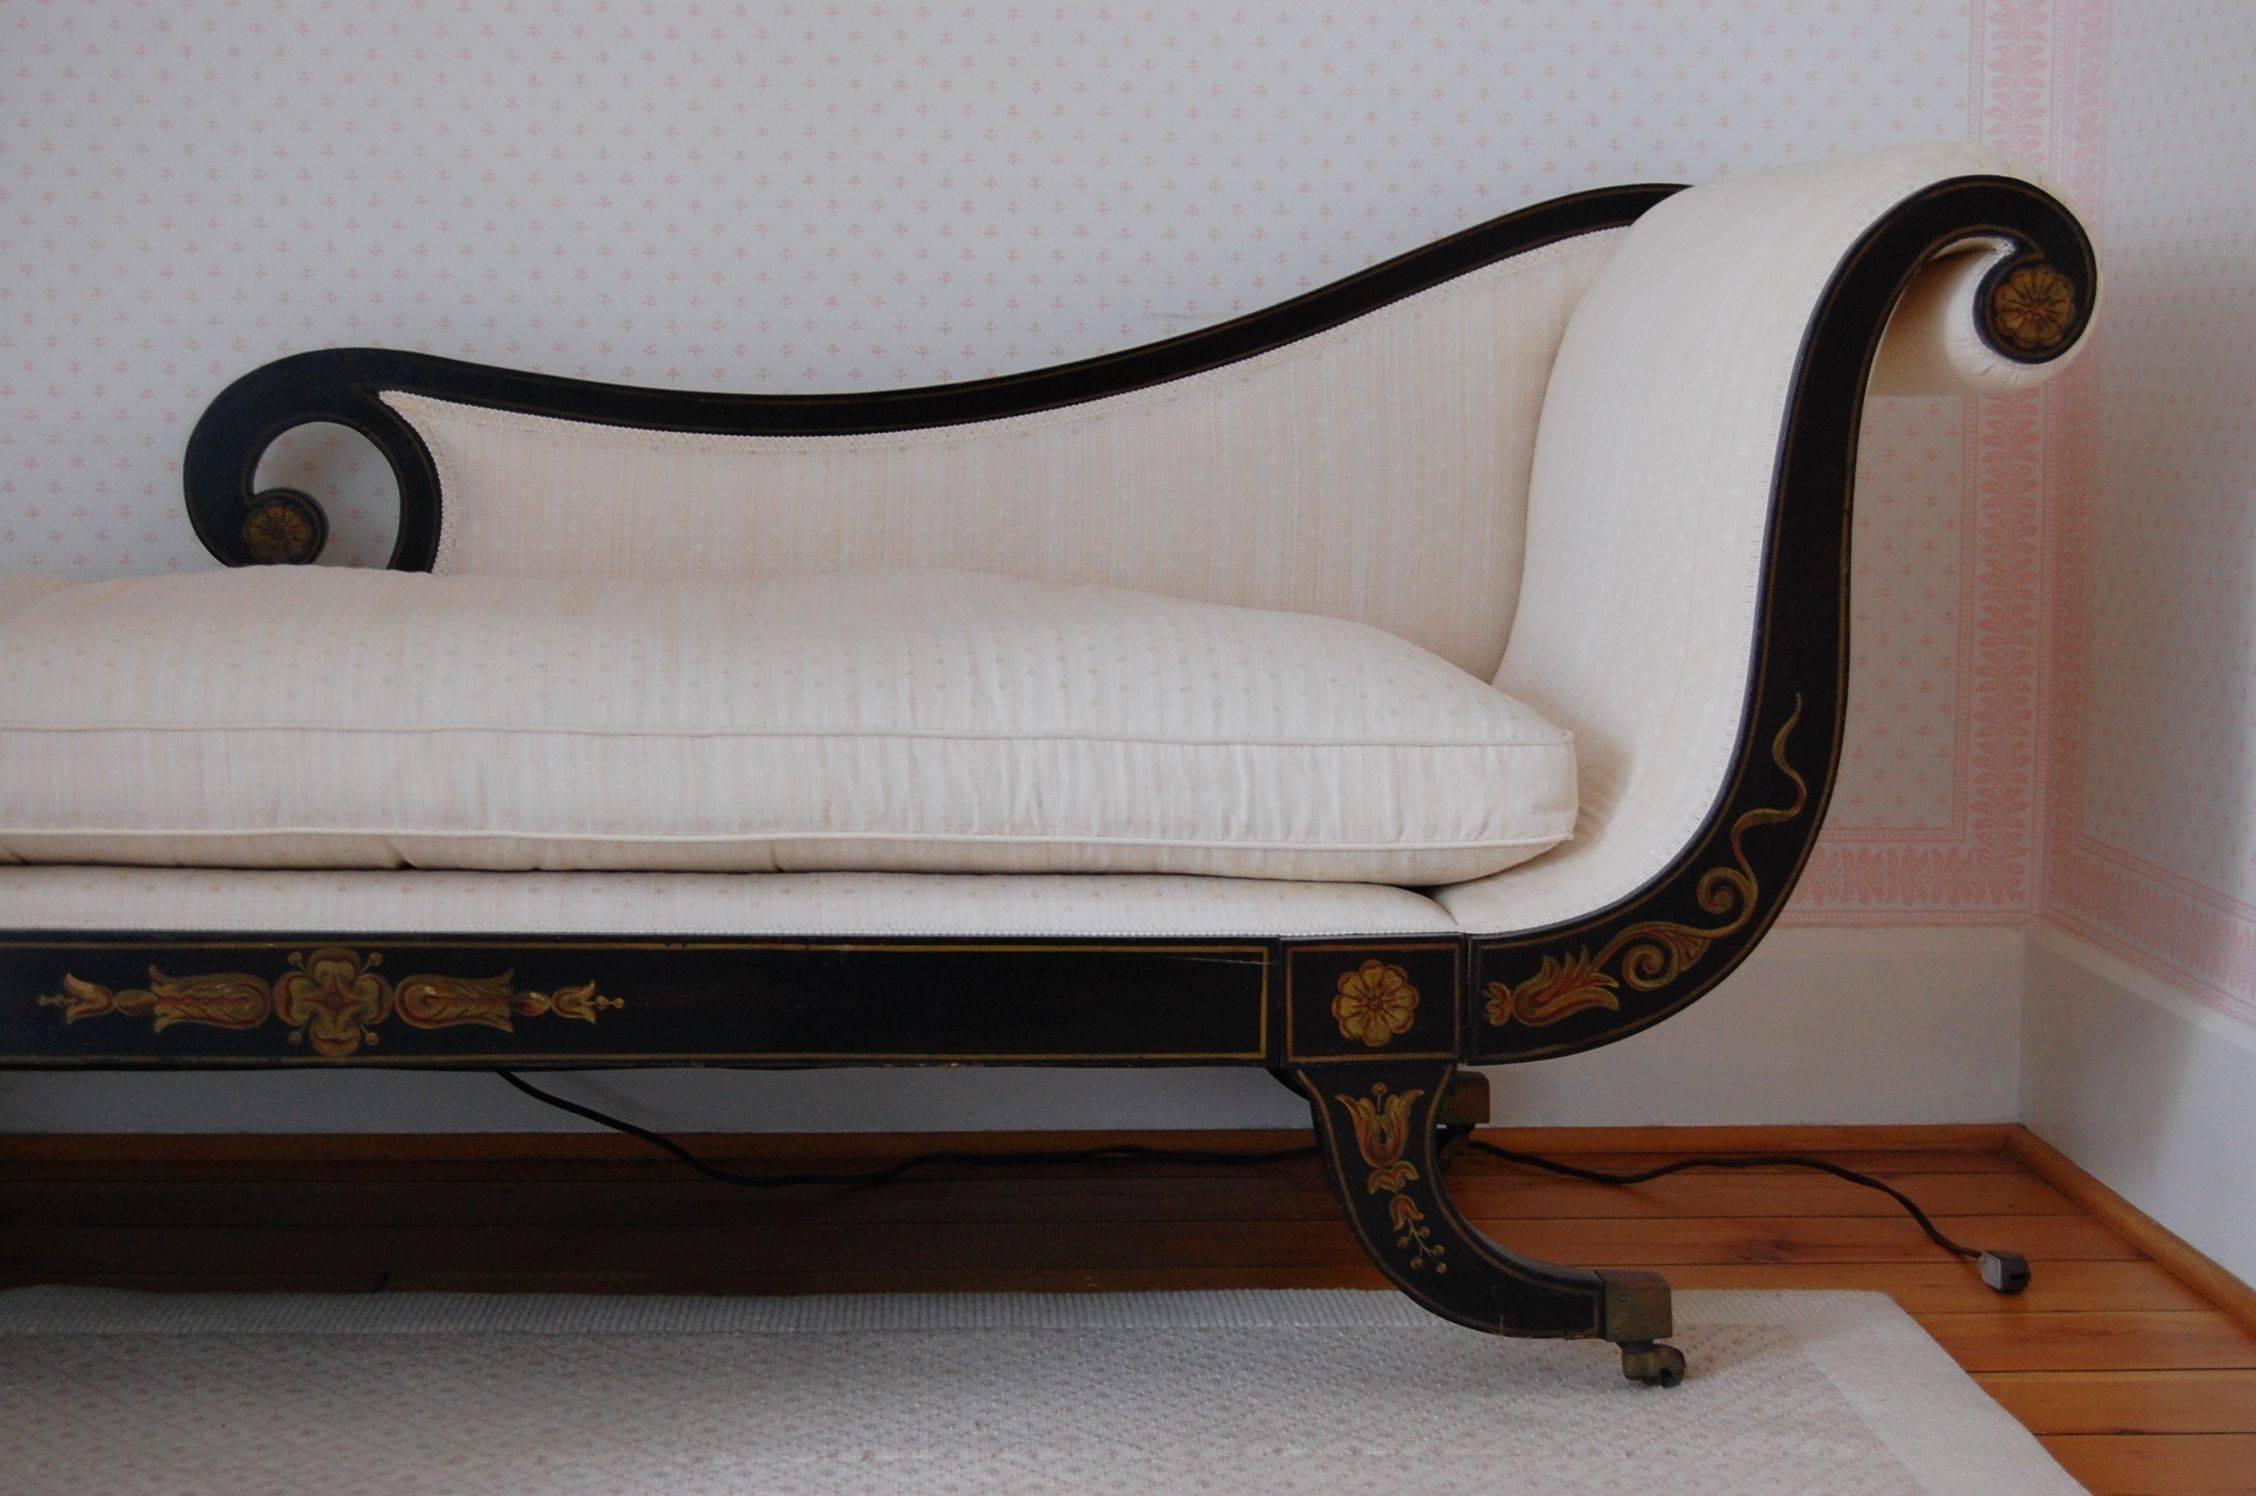 Regency 20th Century Black Lacquered and Decorated Recamier